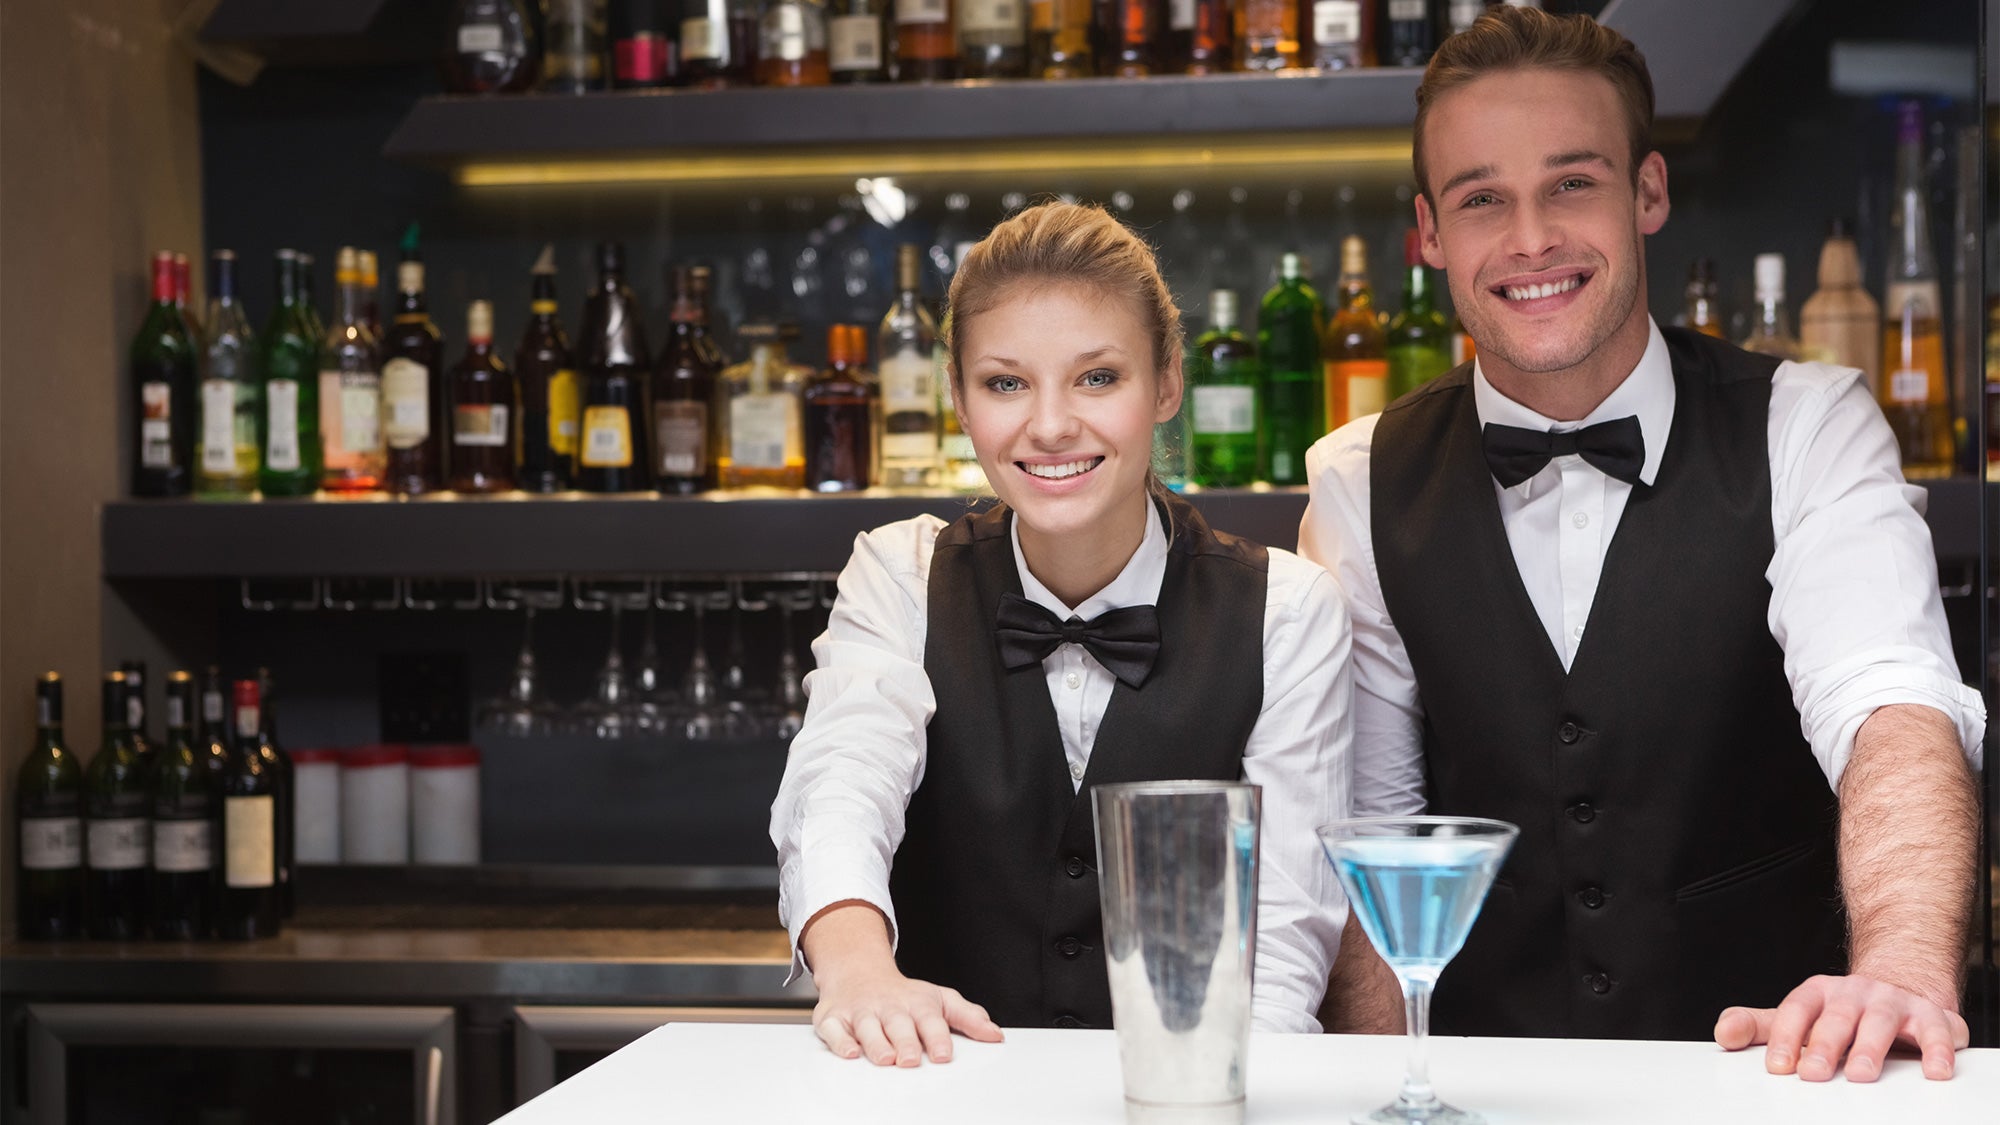 Man and woman bartenders smiling in bow ties